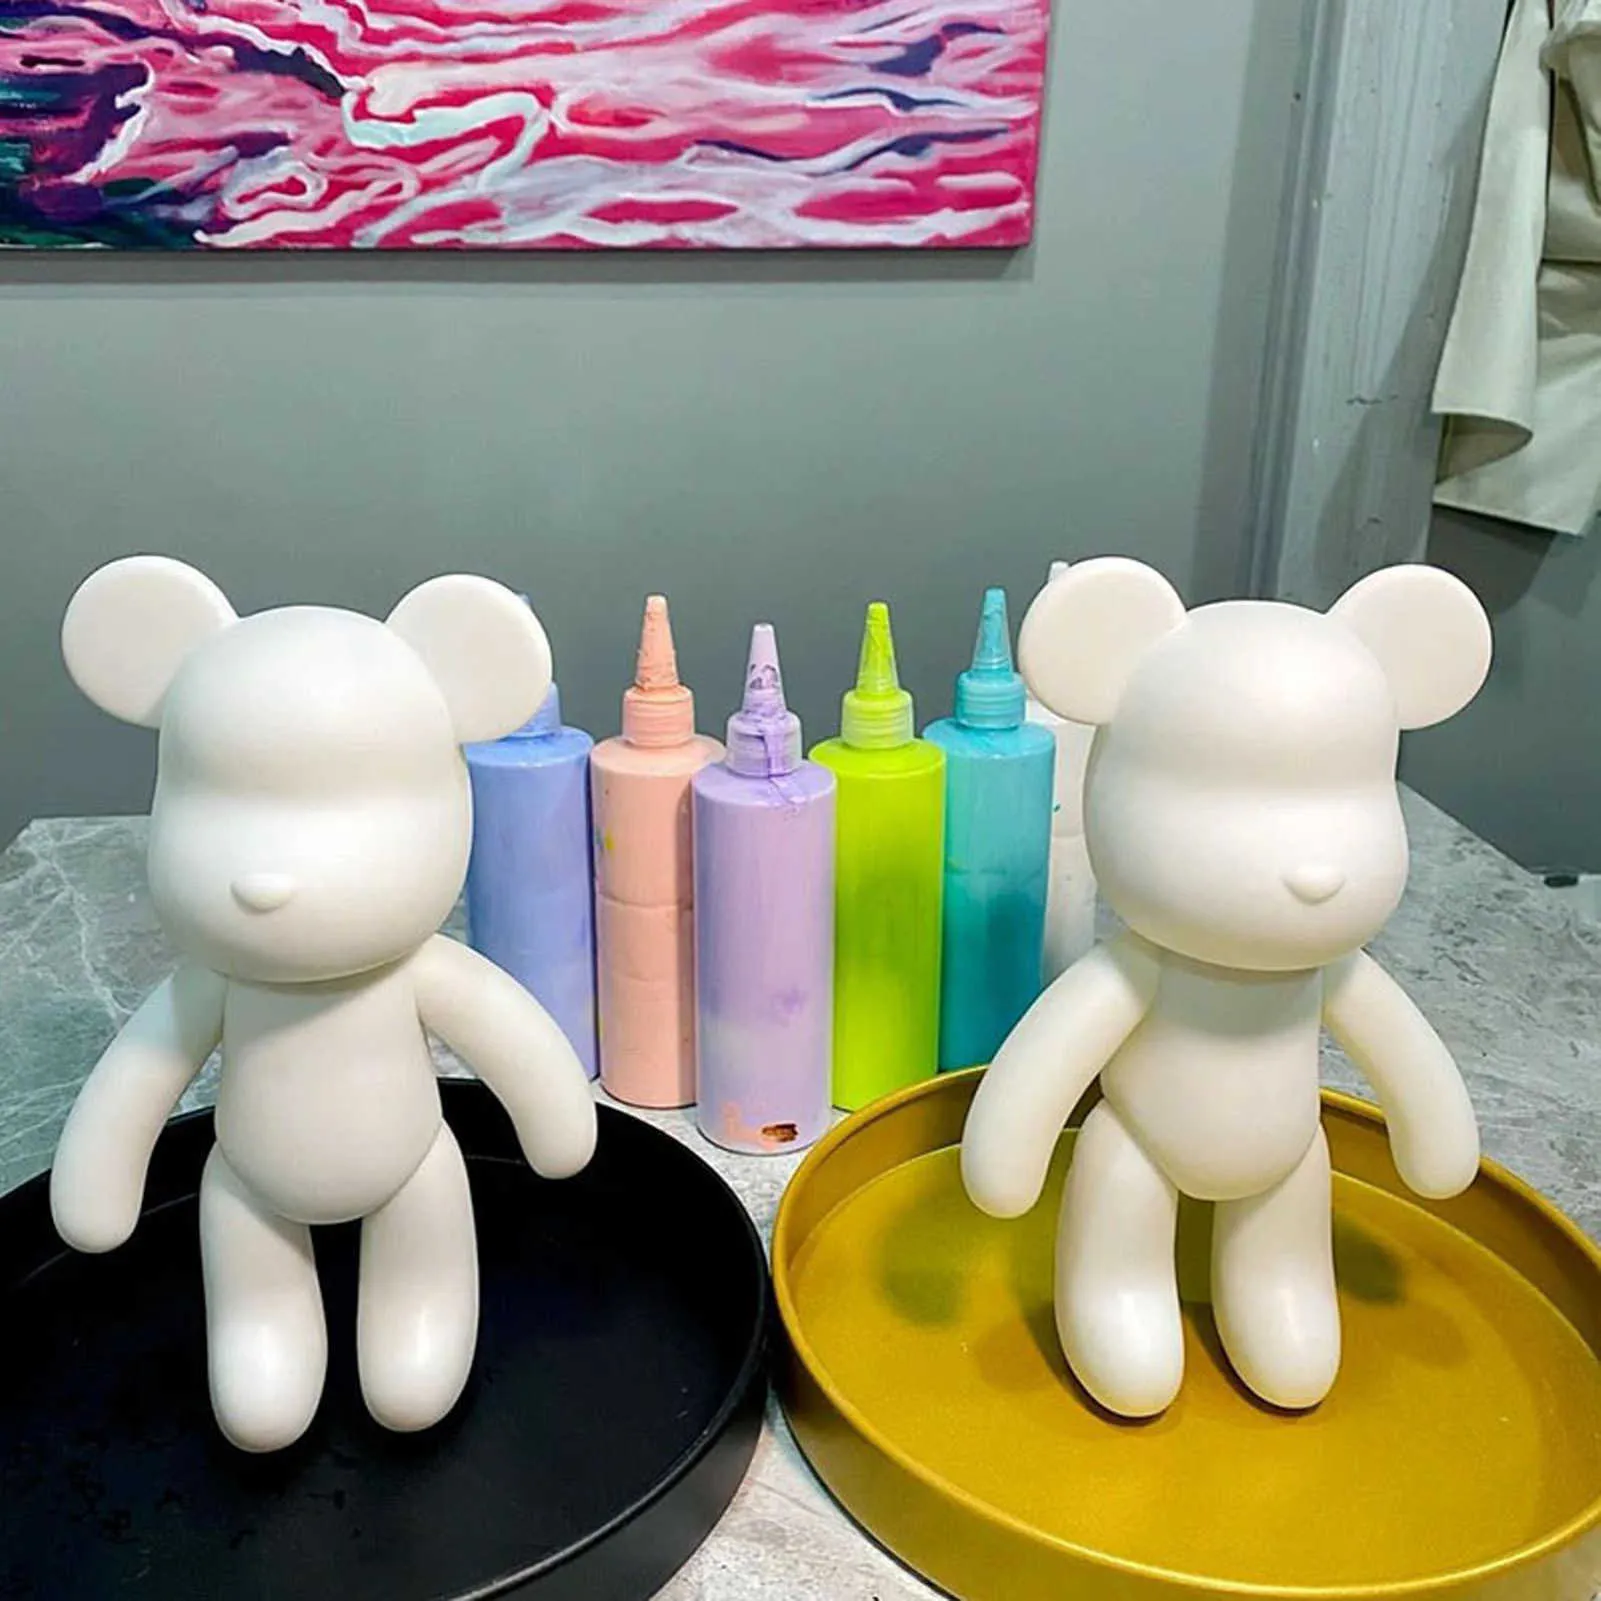 Creative DIY Fluid Bear Graffit Painting Novelty Visual Novel Ornaments For  Parent Child Bonding And Home Decor T221013 From Qiuti14, $6.08